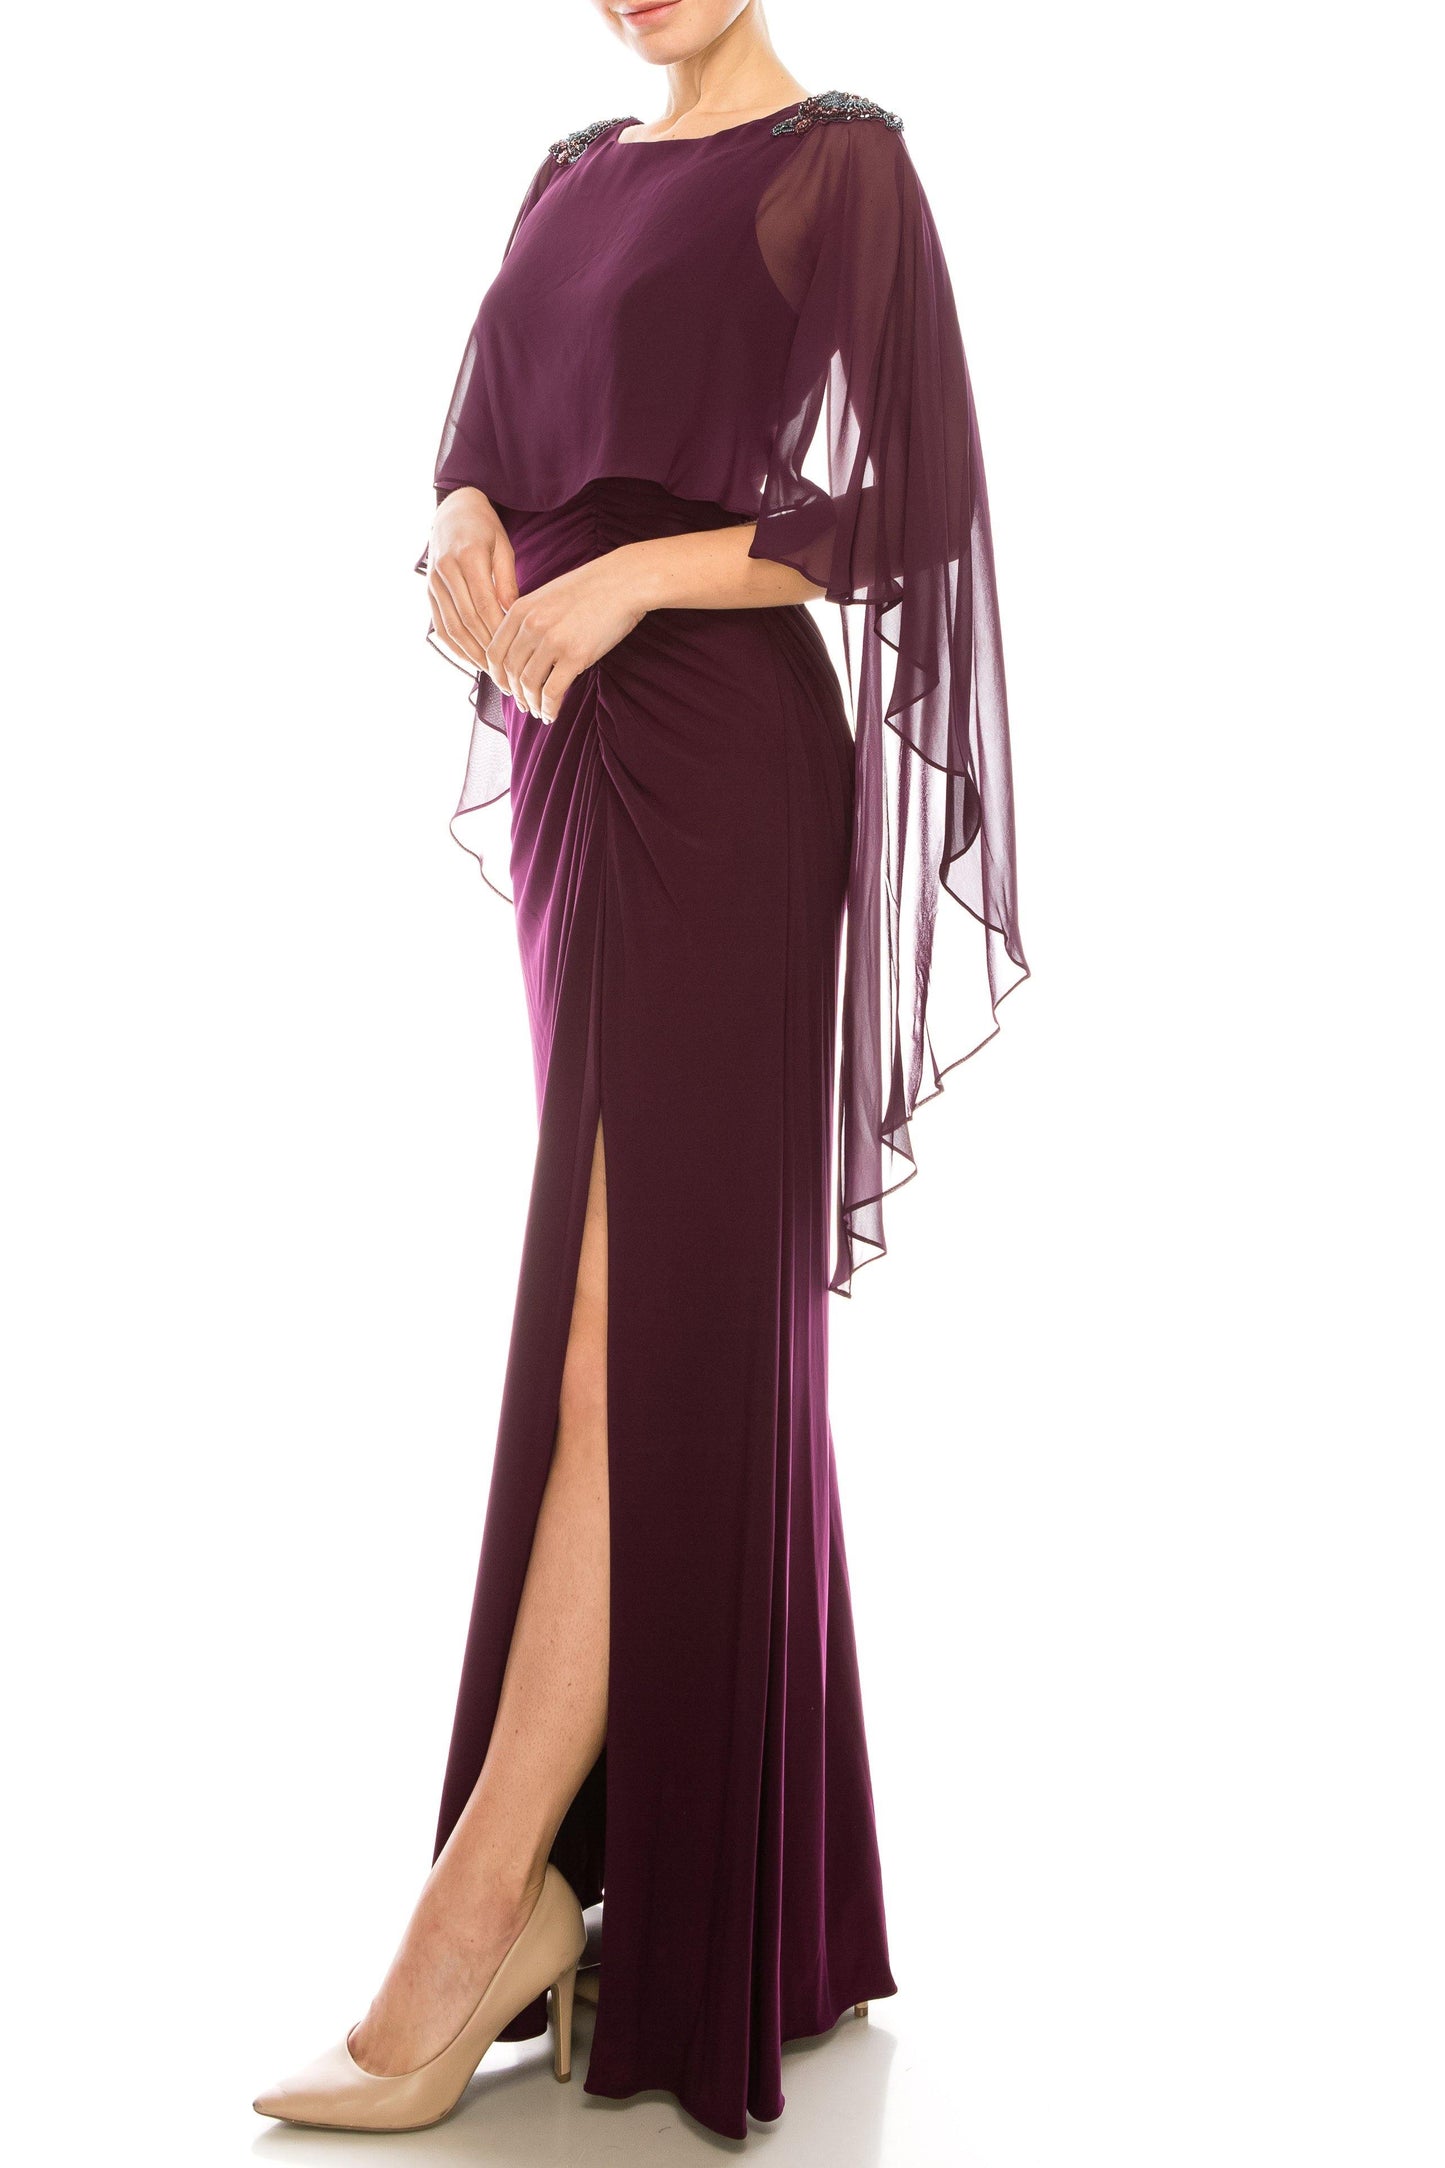 Adrianna Papell Mother of the Bride Cape Dress - The Dress Outlet